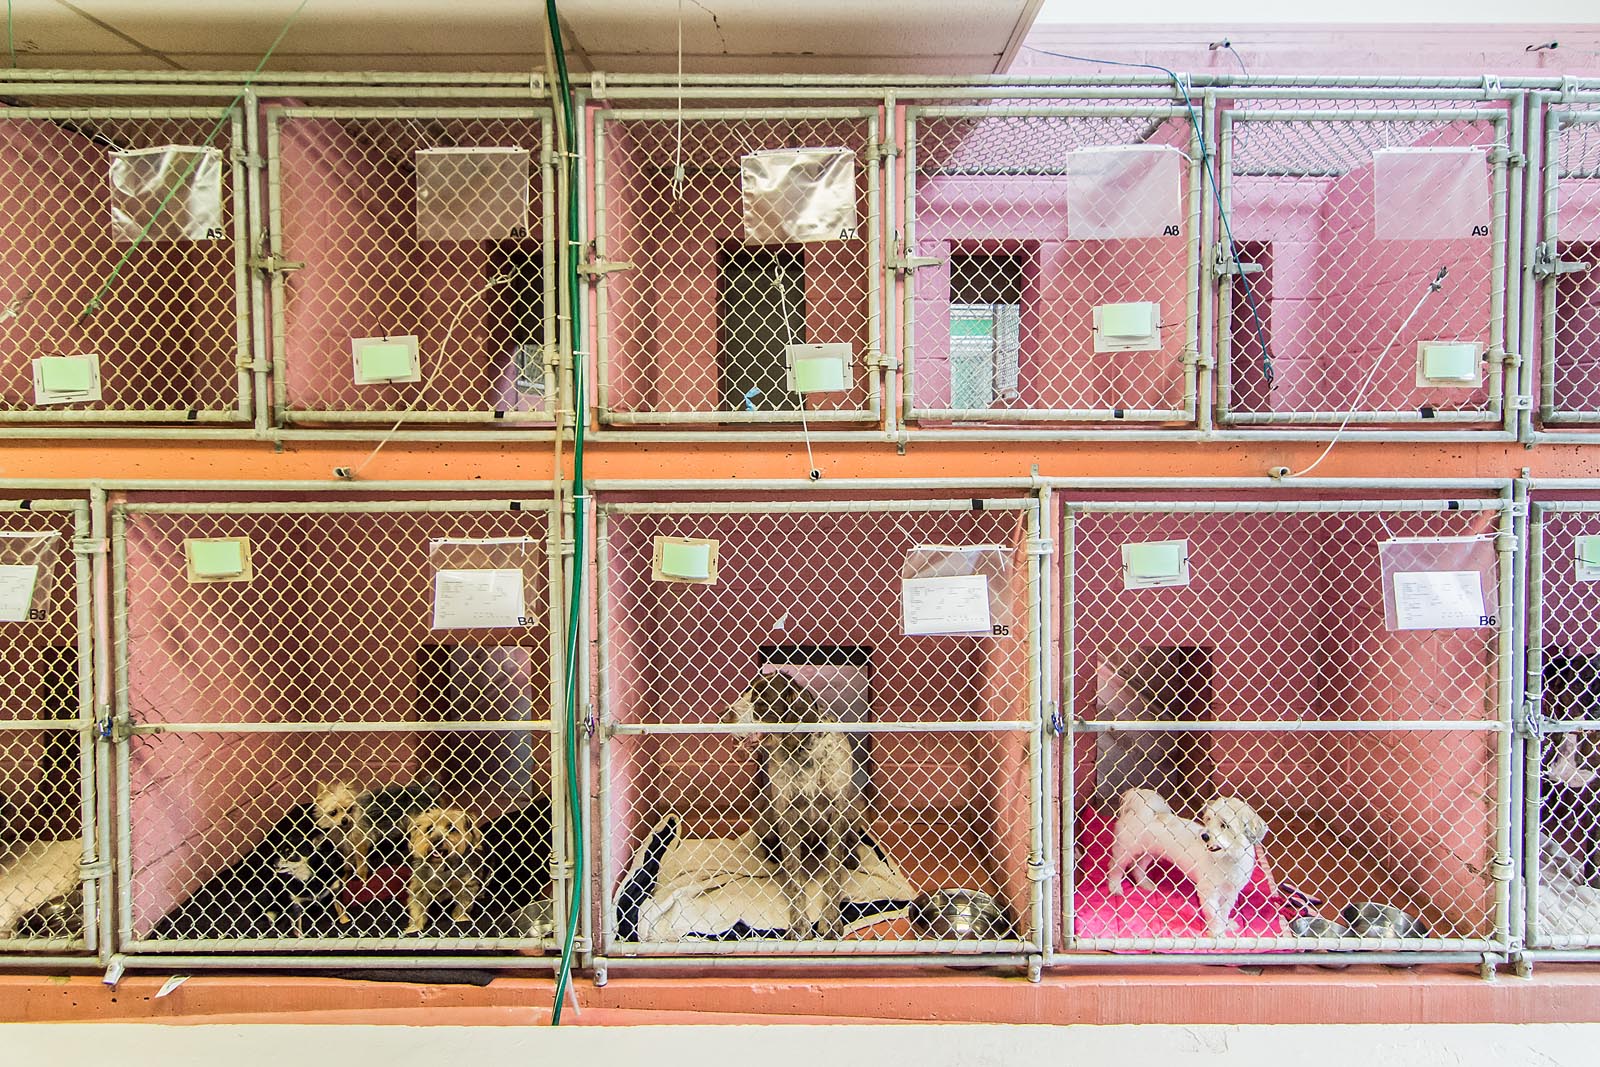 Front of Kennel Run at The Animal Hospital of Roxbury